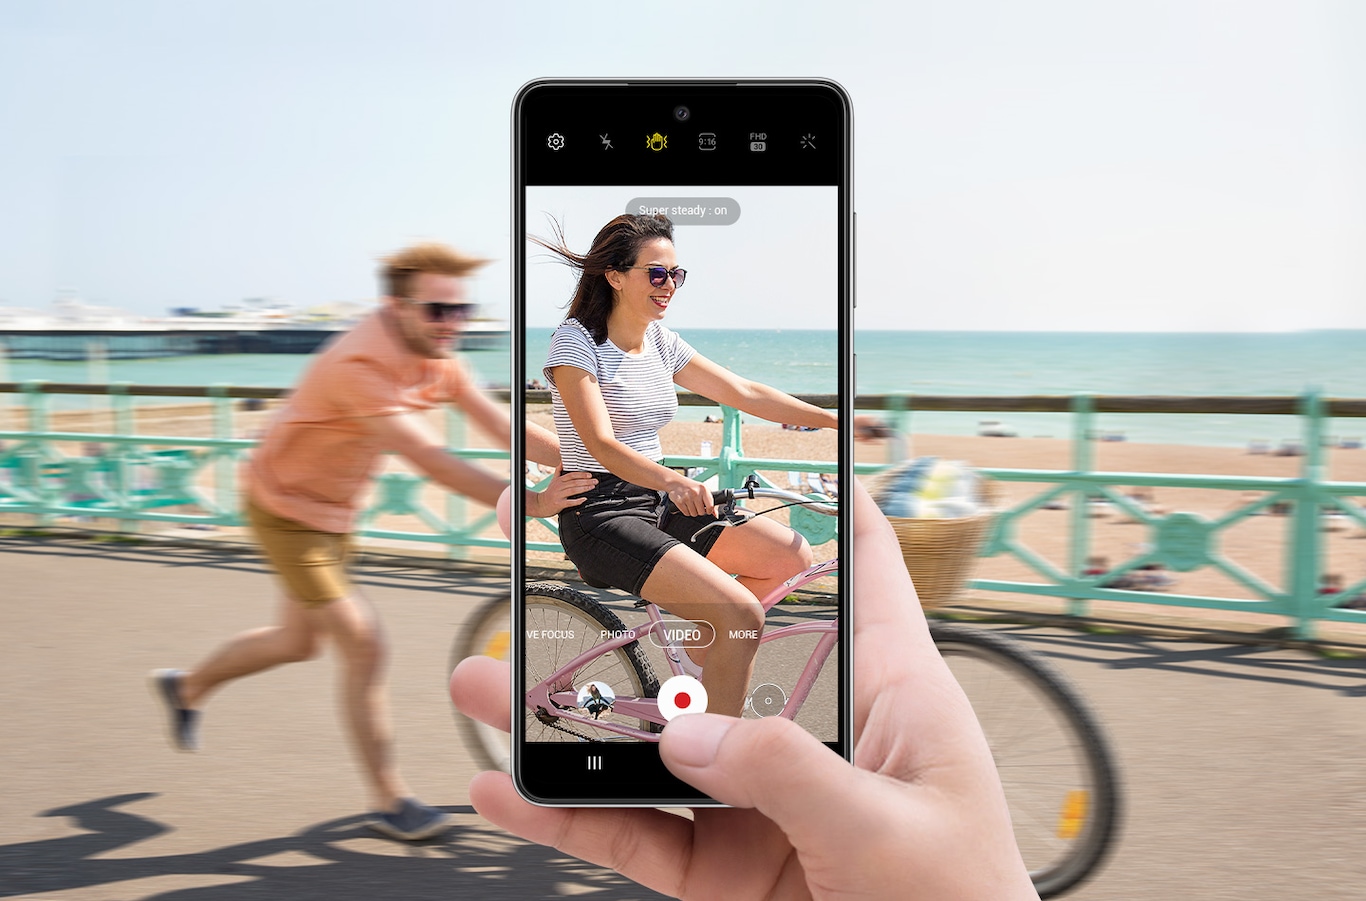 A person on a bike with another person running behind them and pushing. In front of this is a hand holding Galaxy A52s 5G with the camera interface onscreen. The scene in the display is clearer than the scene outside of the display, depicting how Super Steady allows video to be captured smoothly even if the subject is in motion.